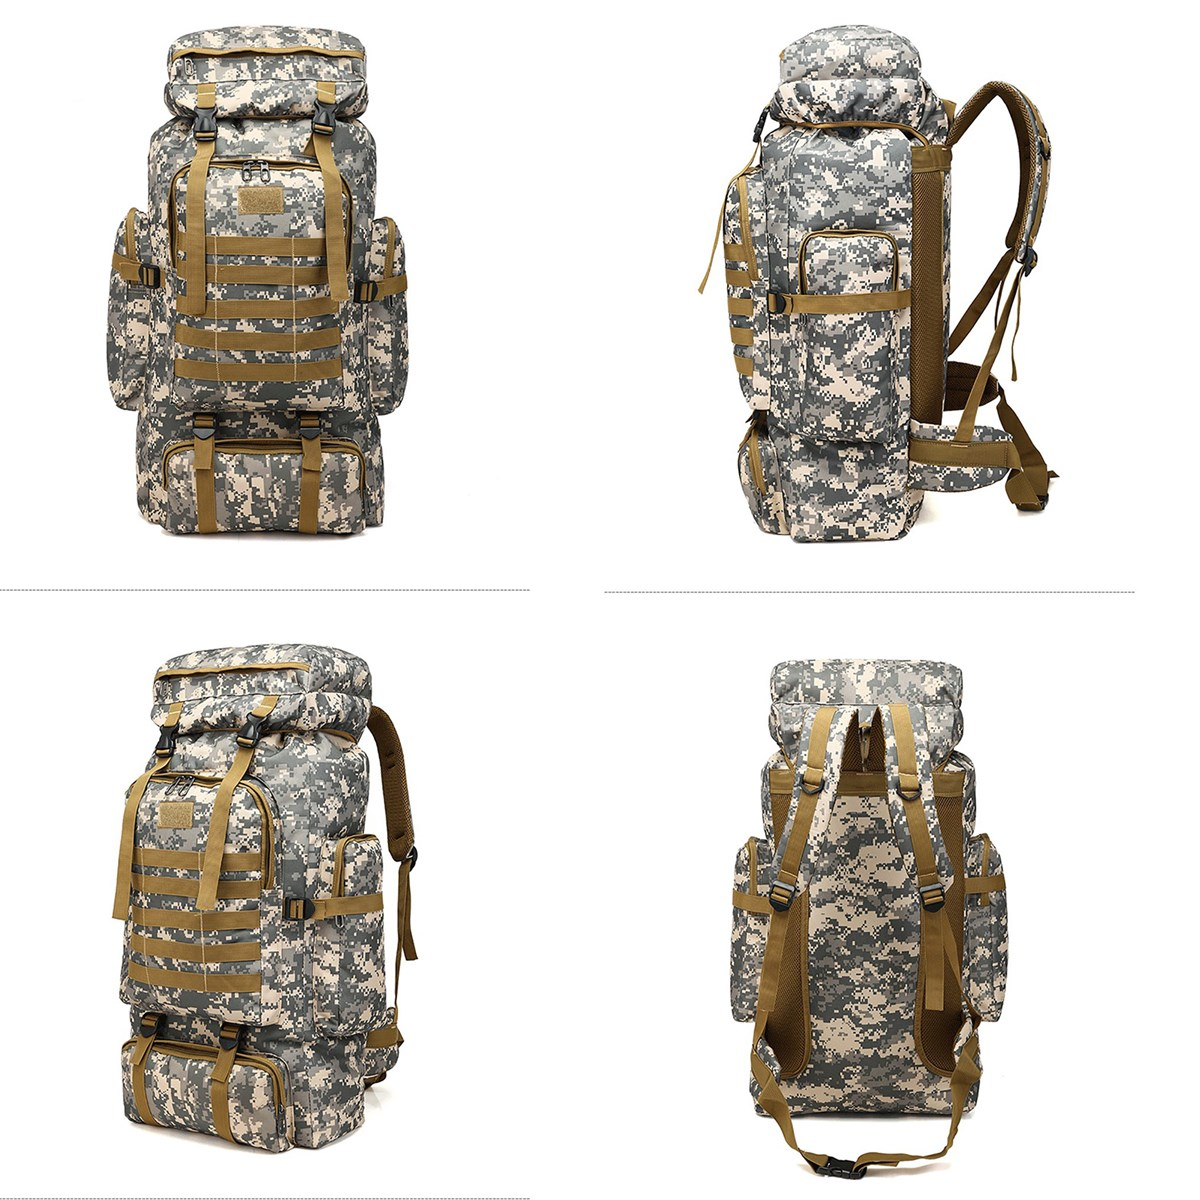 80L-Molle-Tactical-Bag-Outdoor-Traveling-Camping-Hiking-Military-Rucksacks-Backpack-Camouflage-Bag-1556947-7